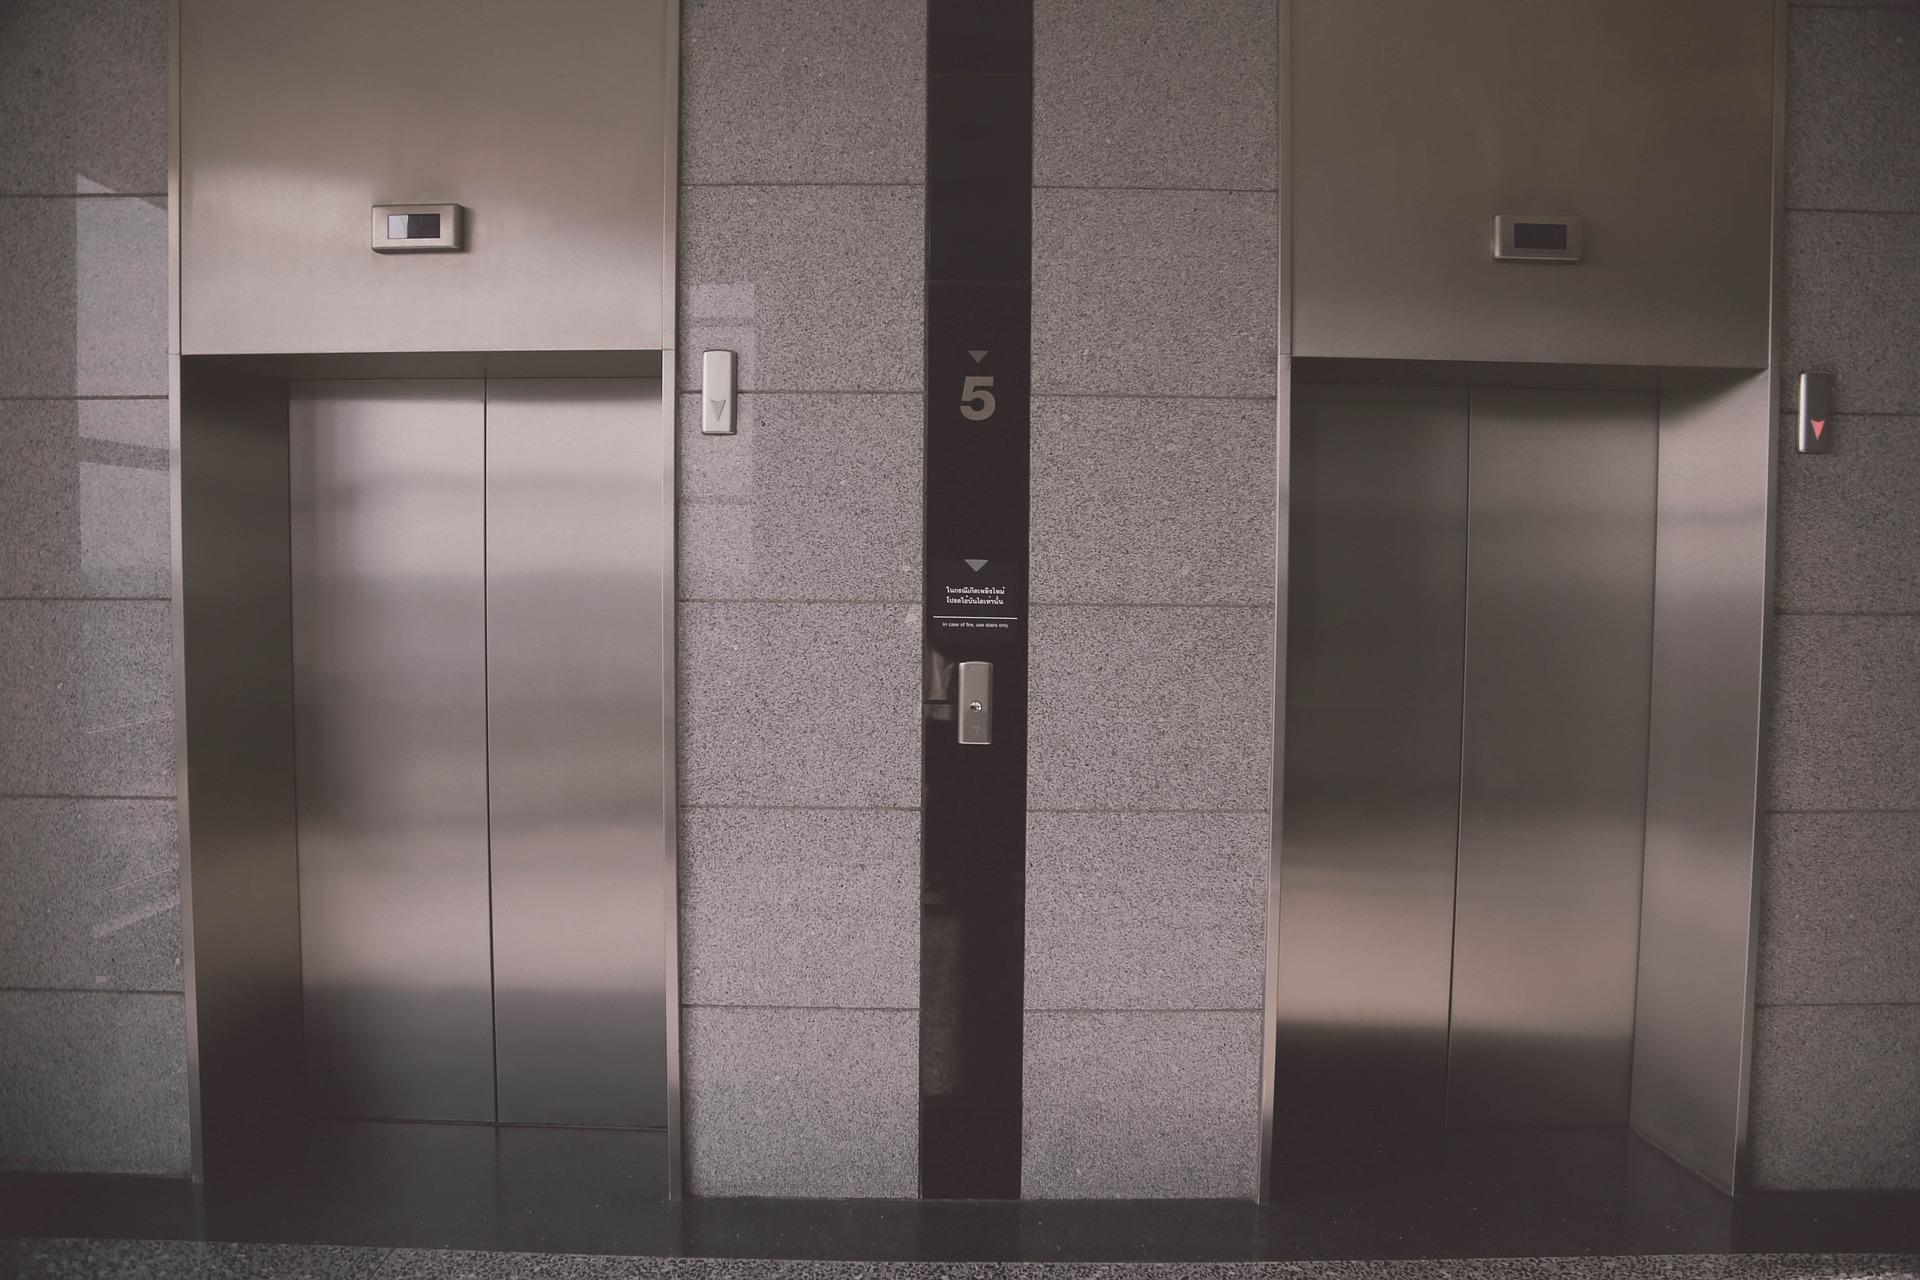 What to Do When You Dream About Elevators